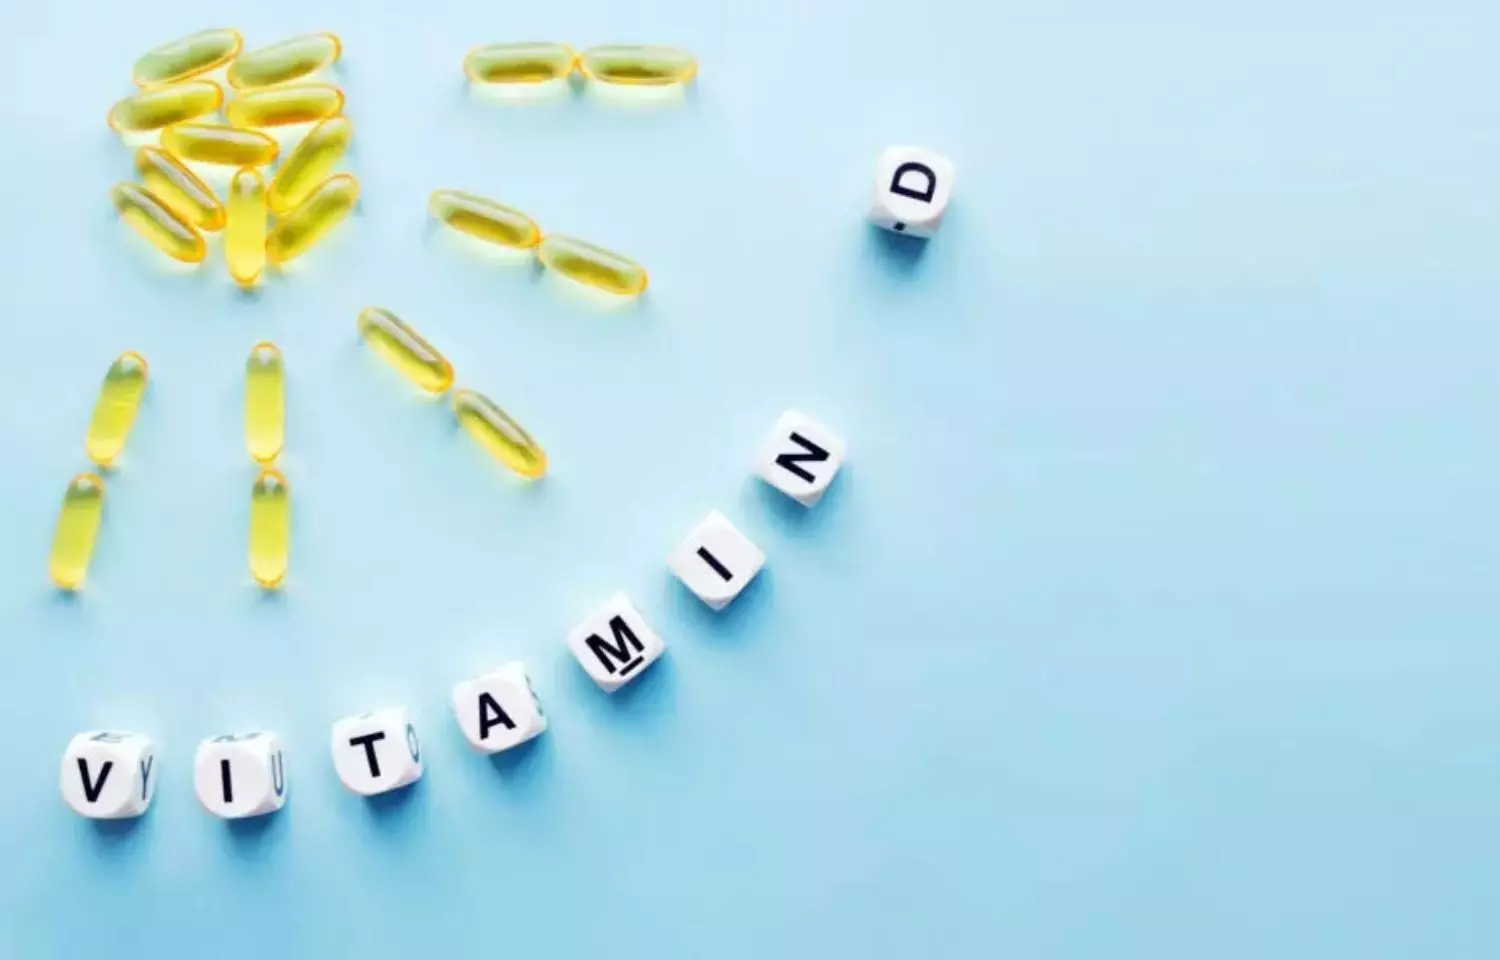 Vitamin D supplement overdosing is possible and harmful, warn doctors